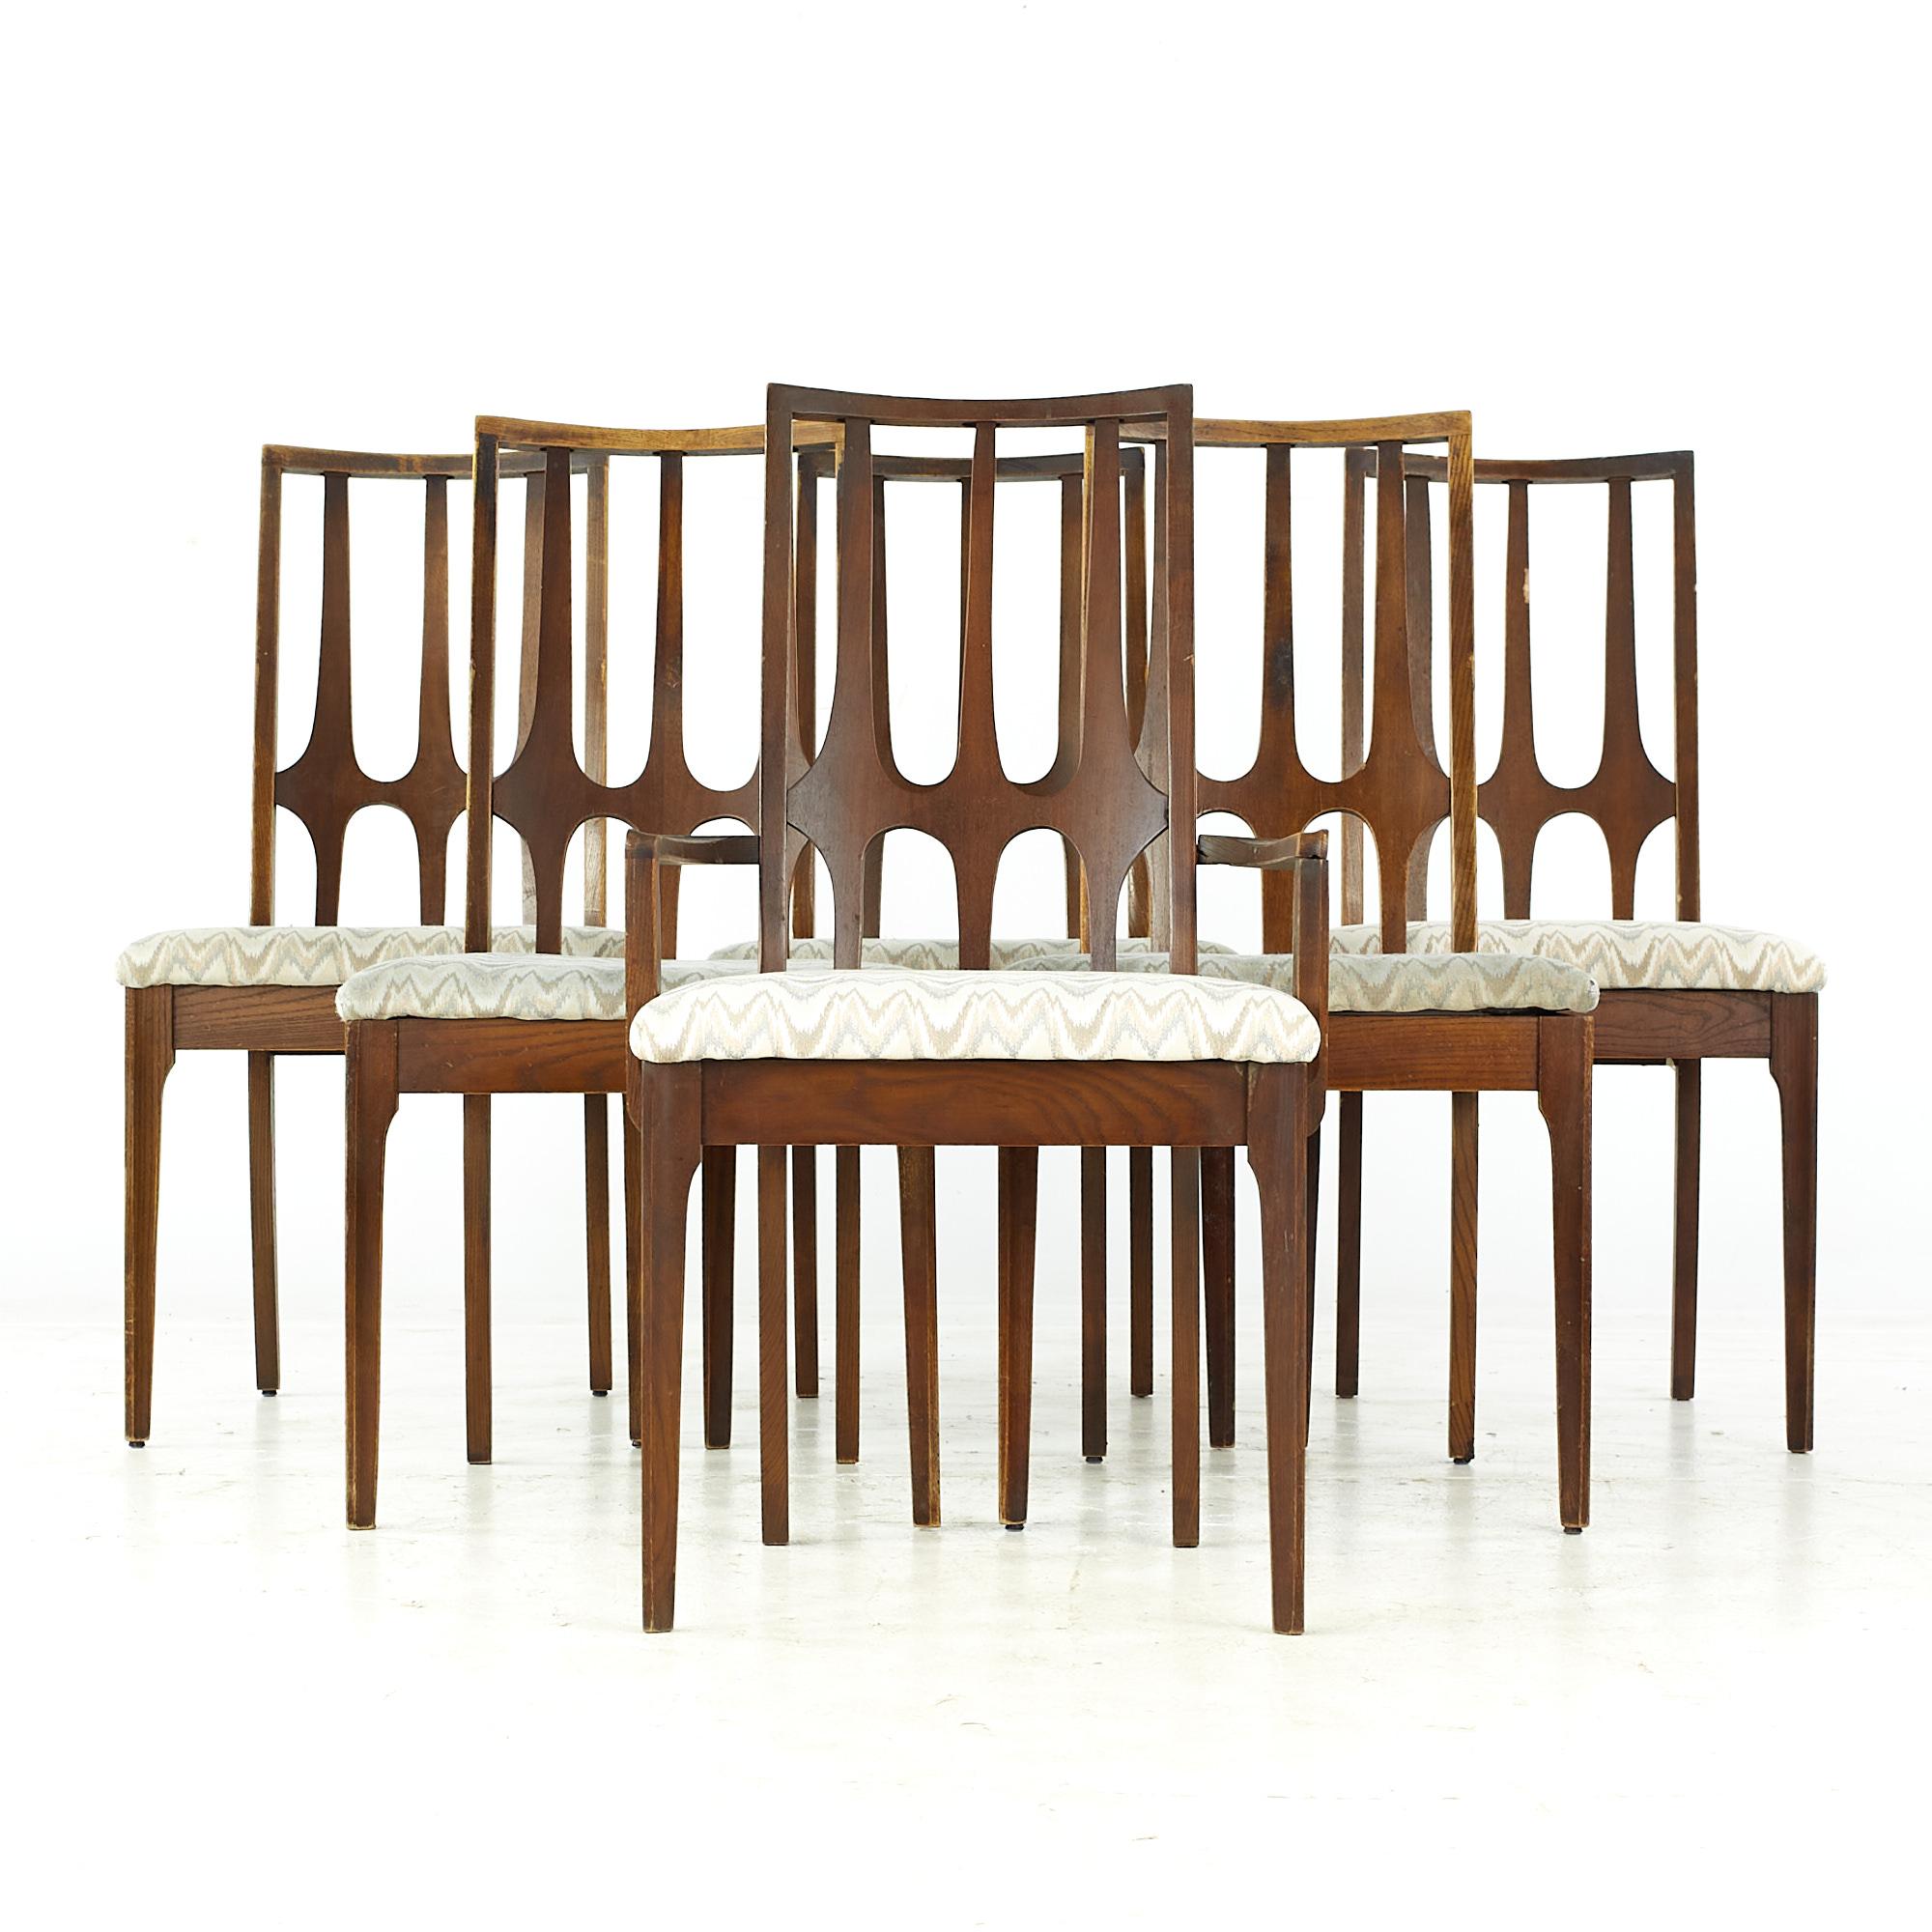 Broyhill Brasilia midcentury walnut dining chairs - set of 6

Each armless chair measures: 20.5 wide x 21 deep x 38 high, with a seat height of 19 inches
Each captains chair measures: 20.5 wide x 21 deep x 38 high, with a seat height of 19